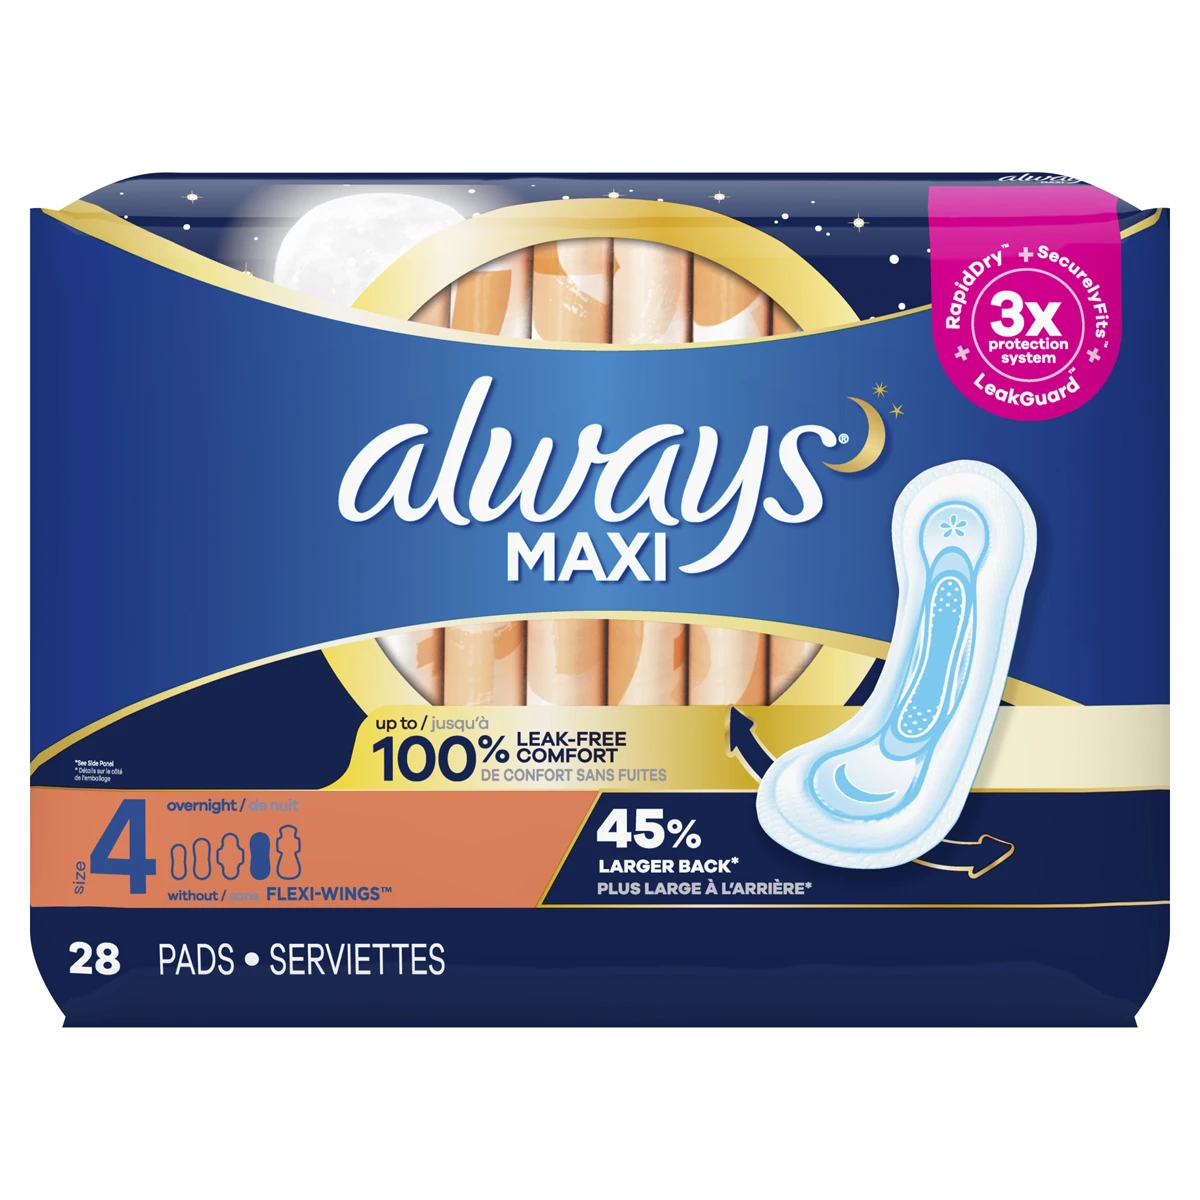 Maxi-Pads-Size-4-Overnight-non-Wings-28-Count